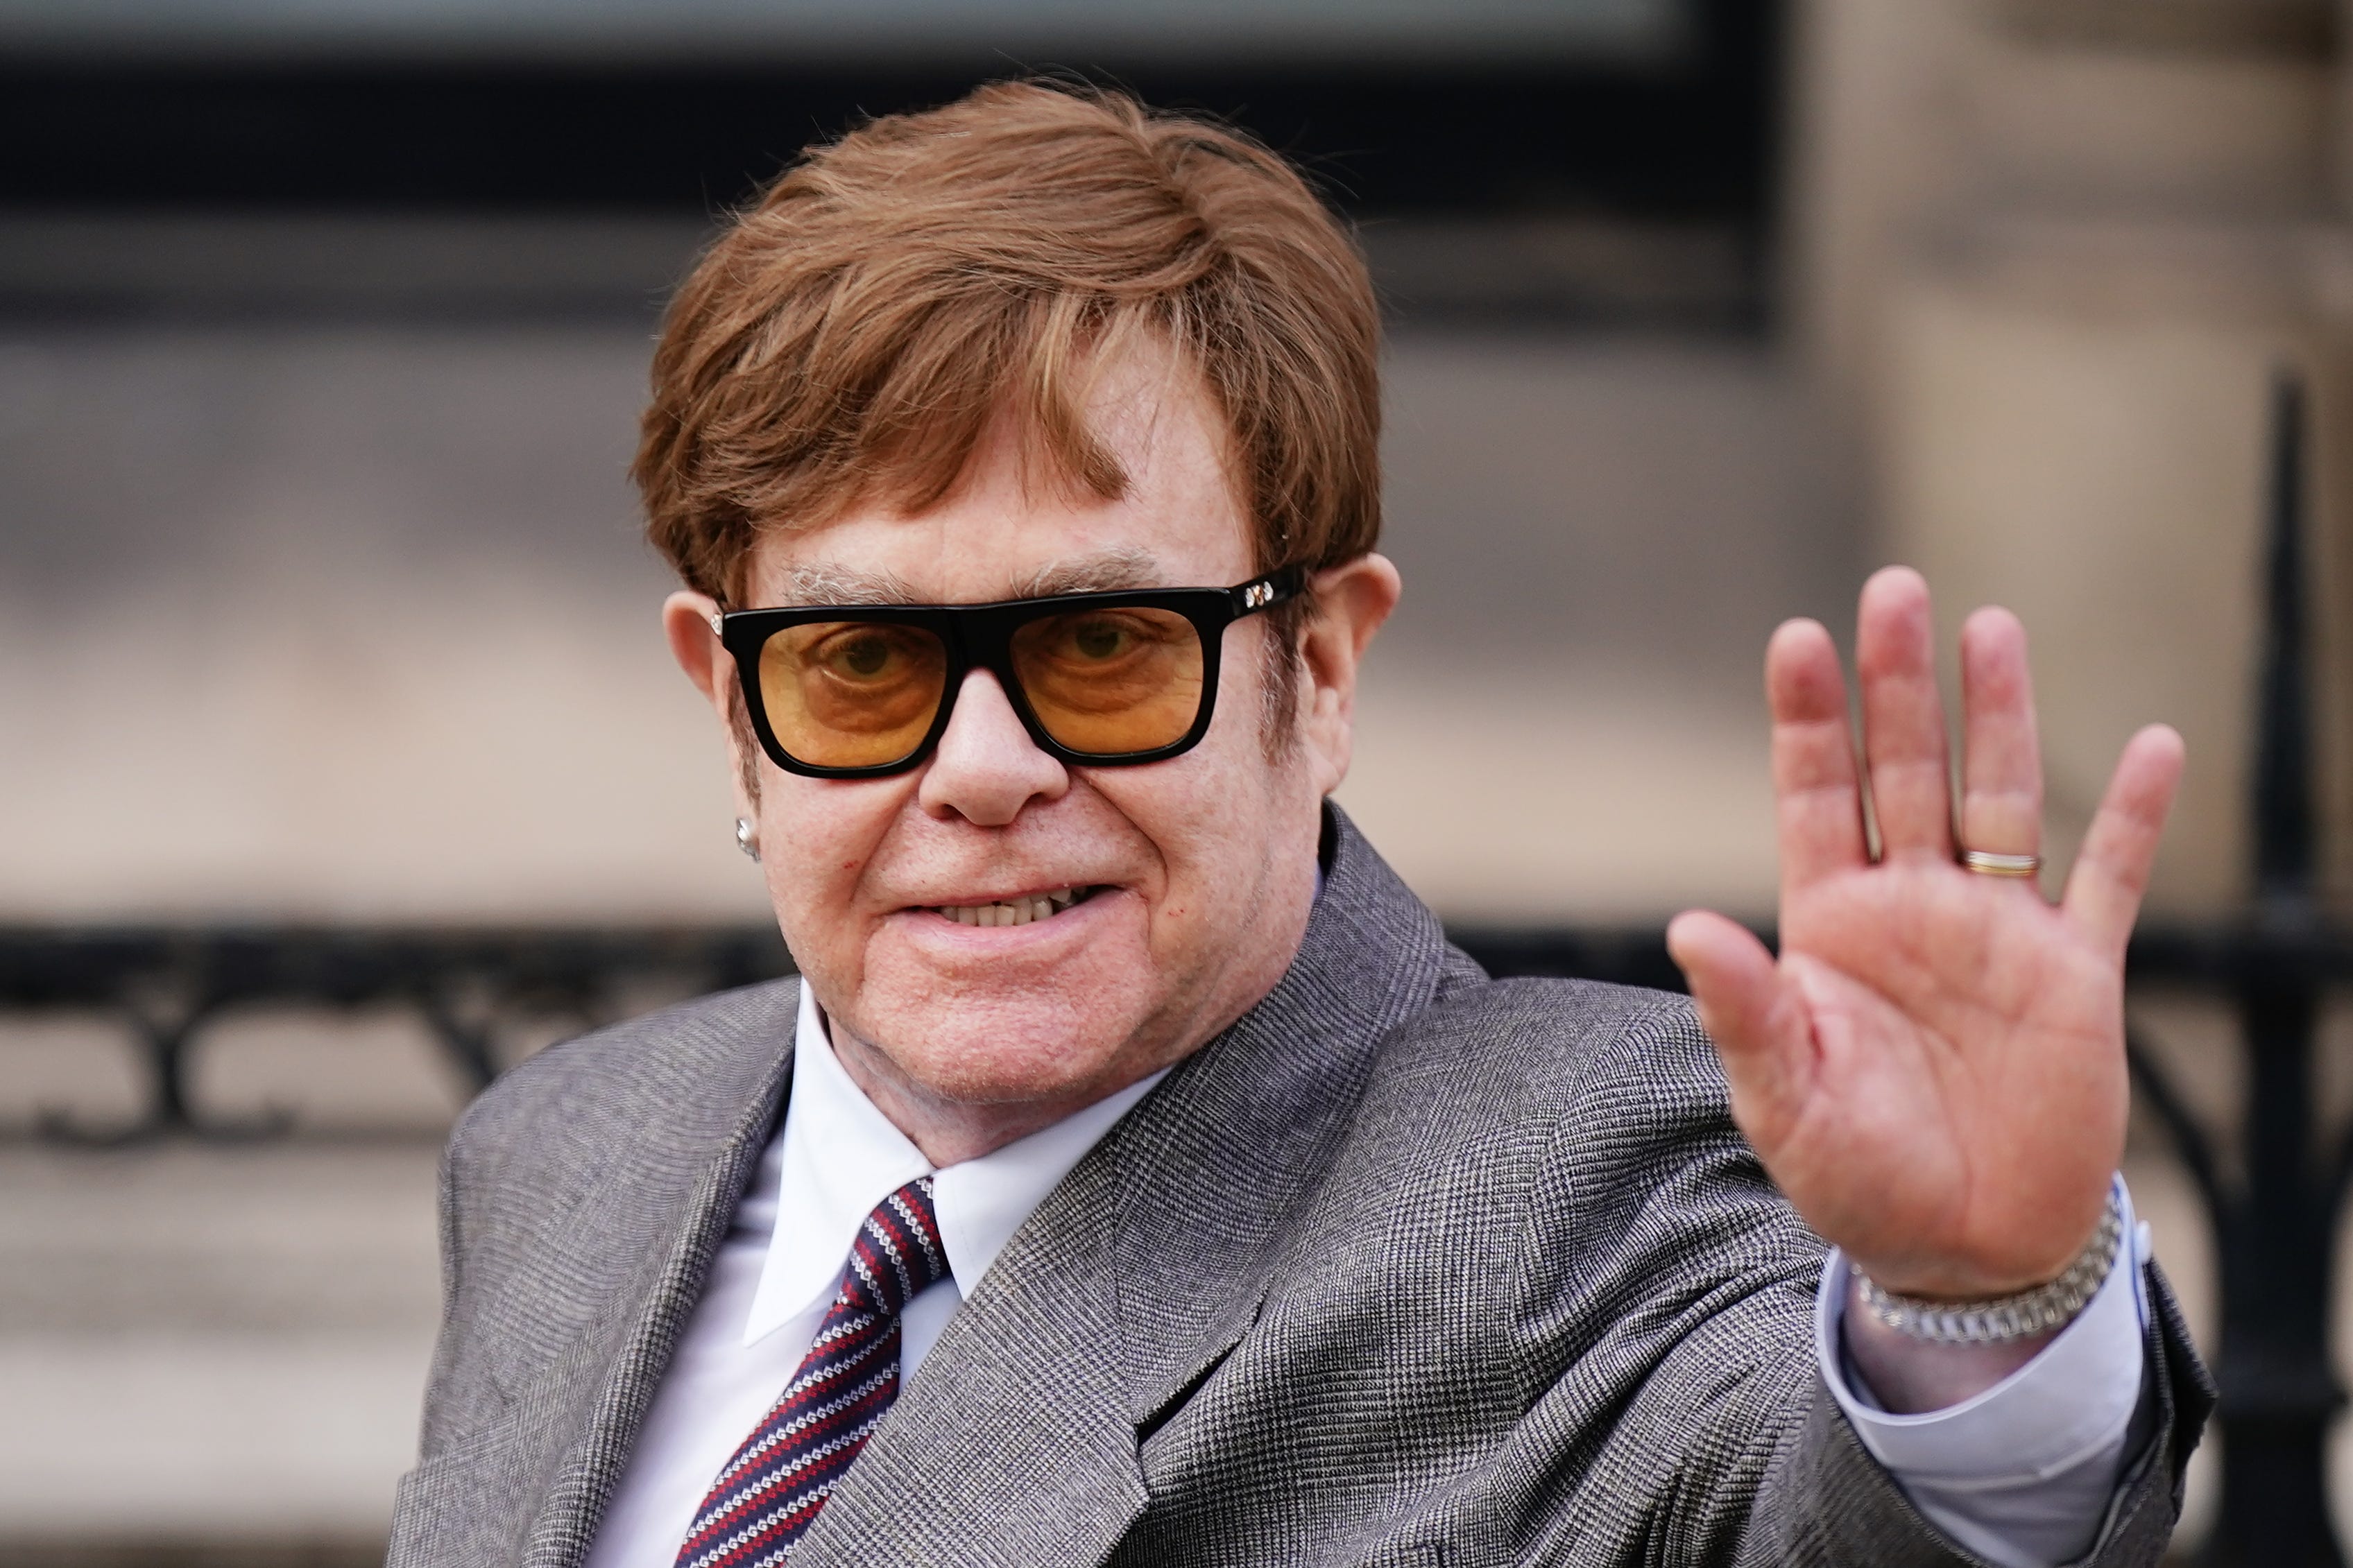 Elton John expressed delight over his call with Vladimir Putin before realising it was a hoax call